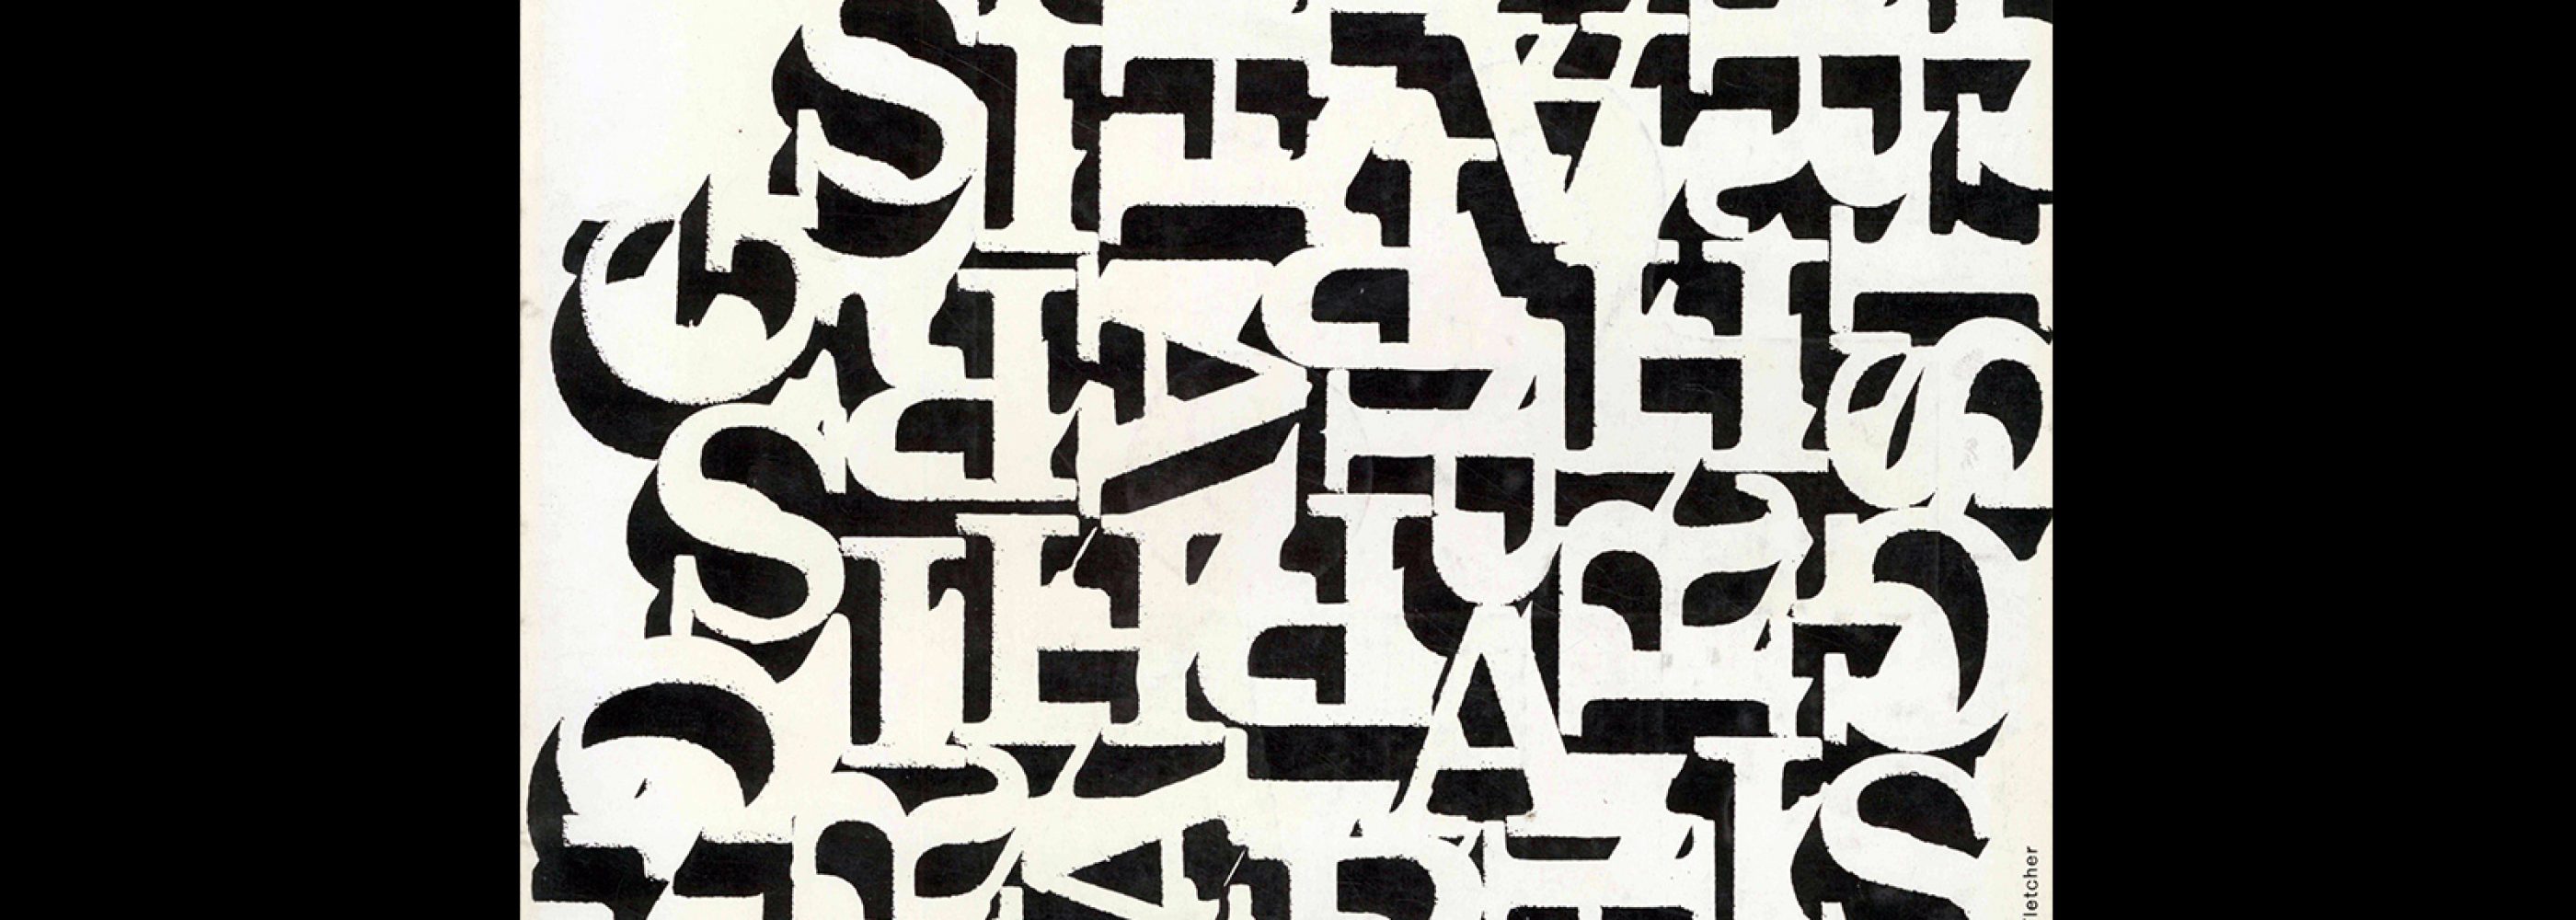 Graphis 92, 1960. Cover design by Alan Fletcher.